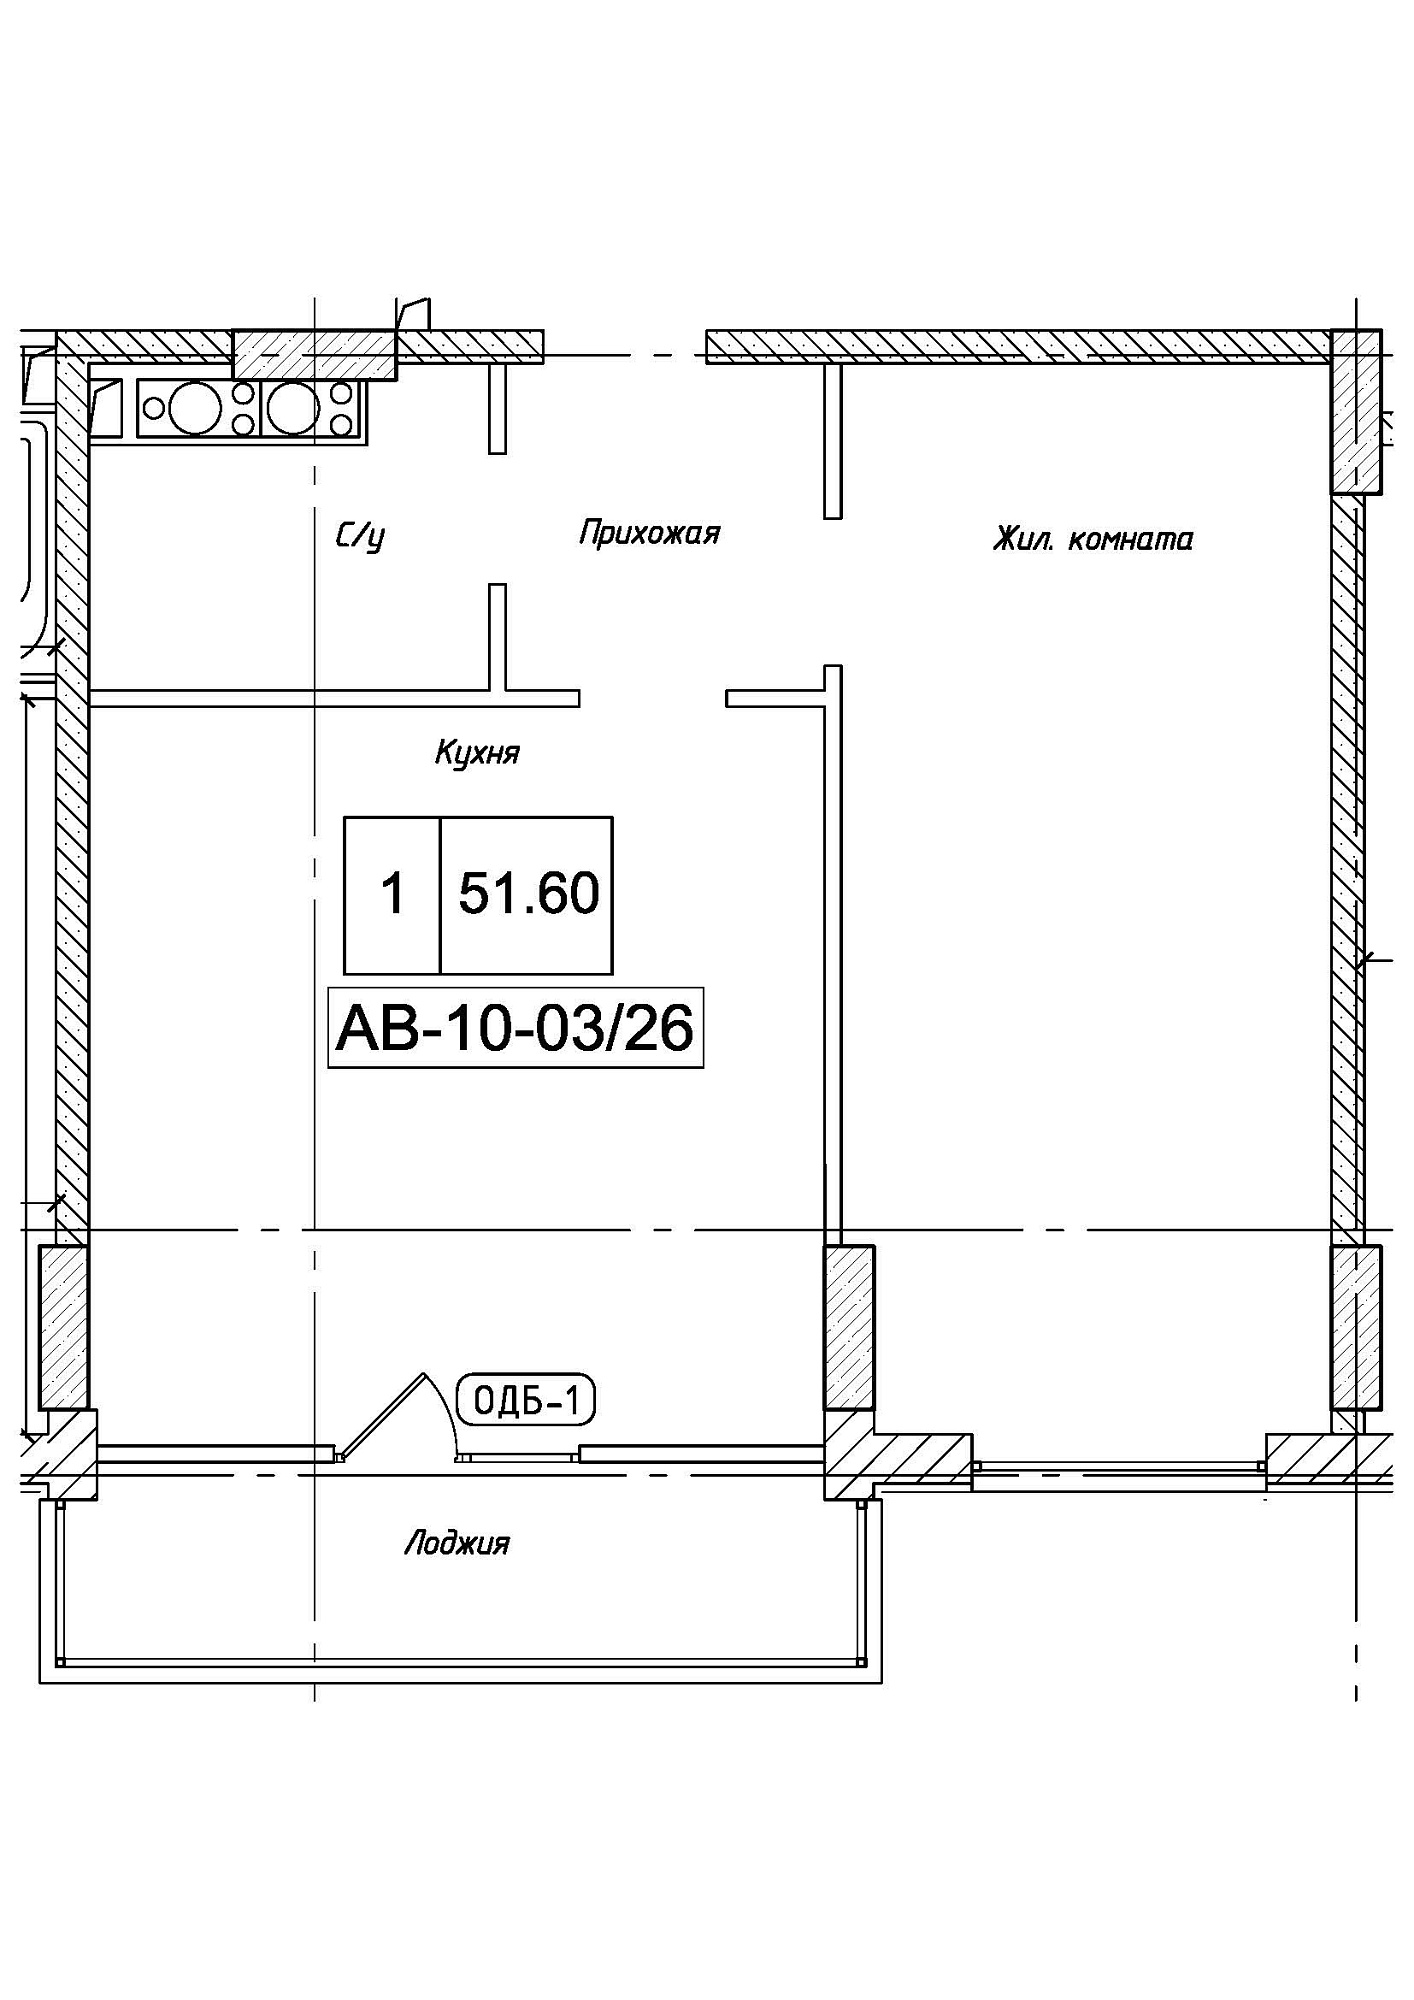 Planning 1-rm flats area 51.6m2, AB-10-03/00026.